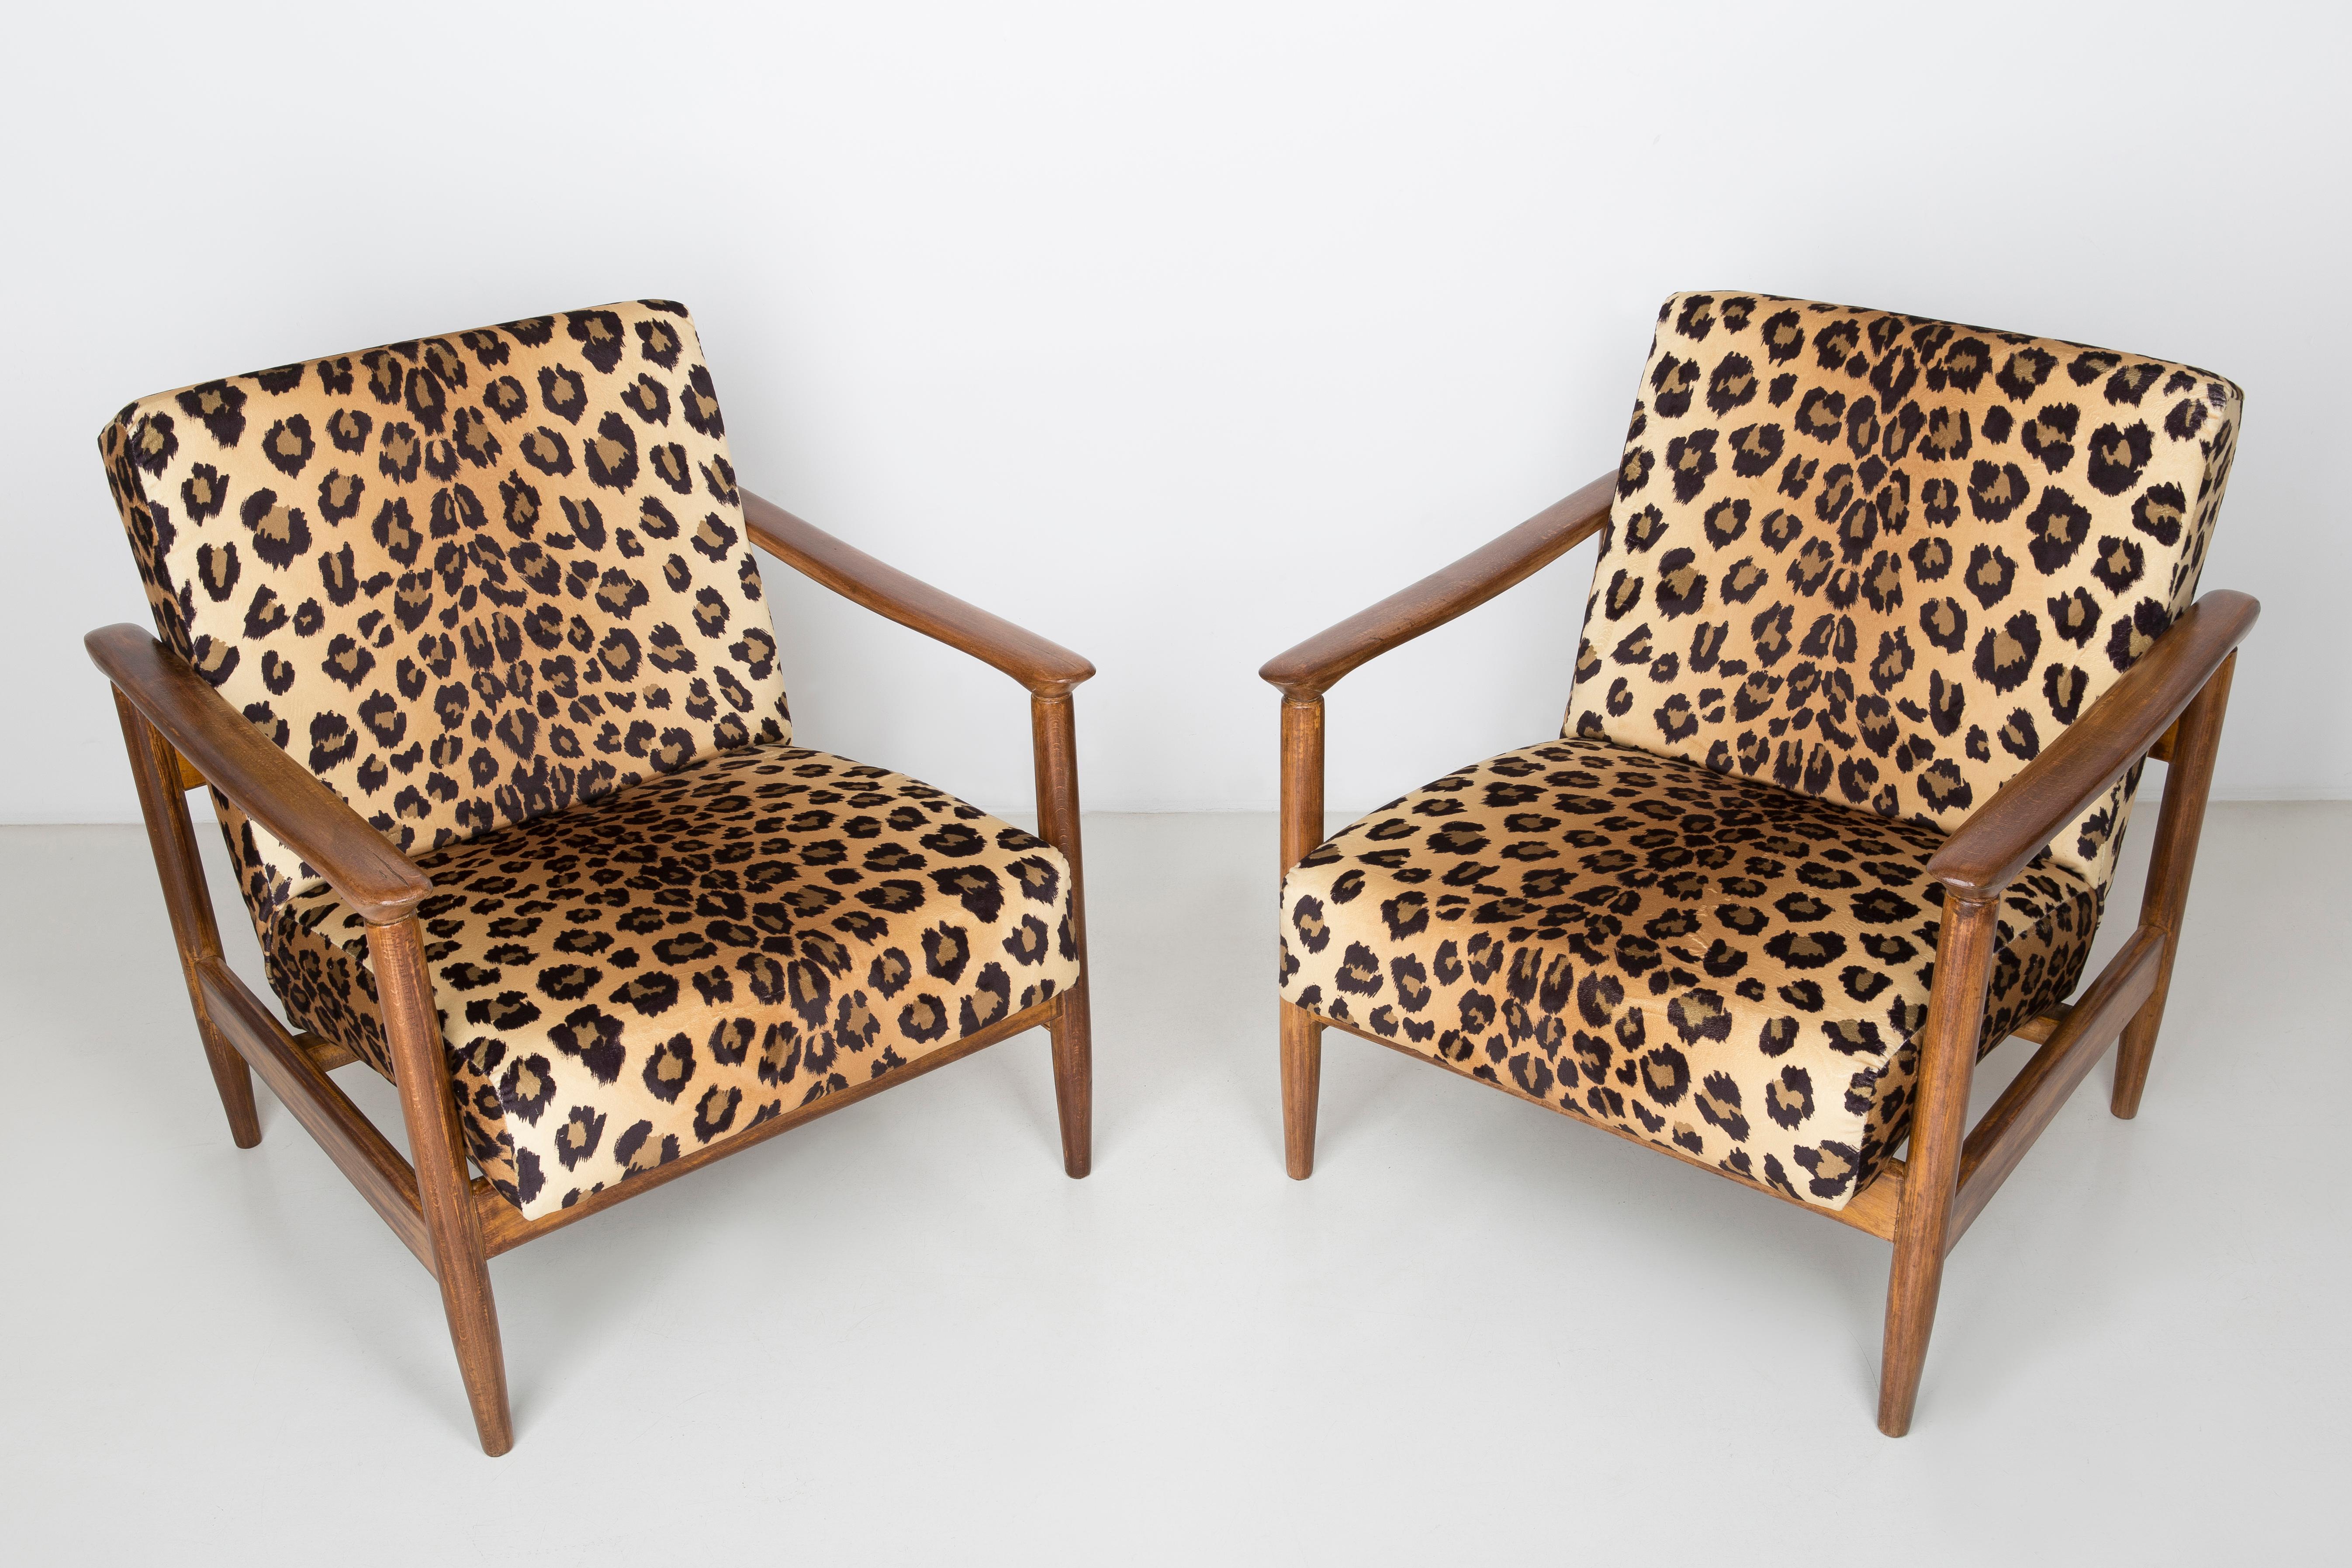 A pair of armchairs GFM-142, designed by Edmund Homa. The armchairs were made in the 1960s in the Gosciecinska furniture factory. They are made from solid beech wood. The GFM-142 armchair is regarded one of the best polish armchair design from the